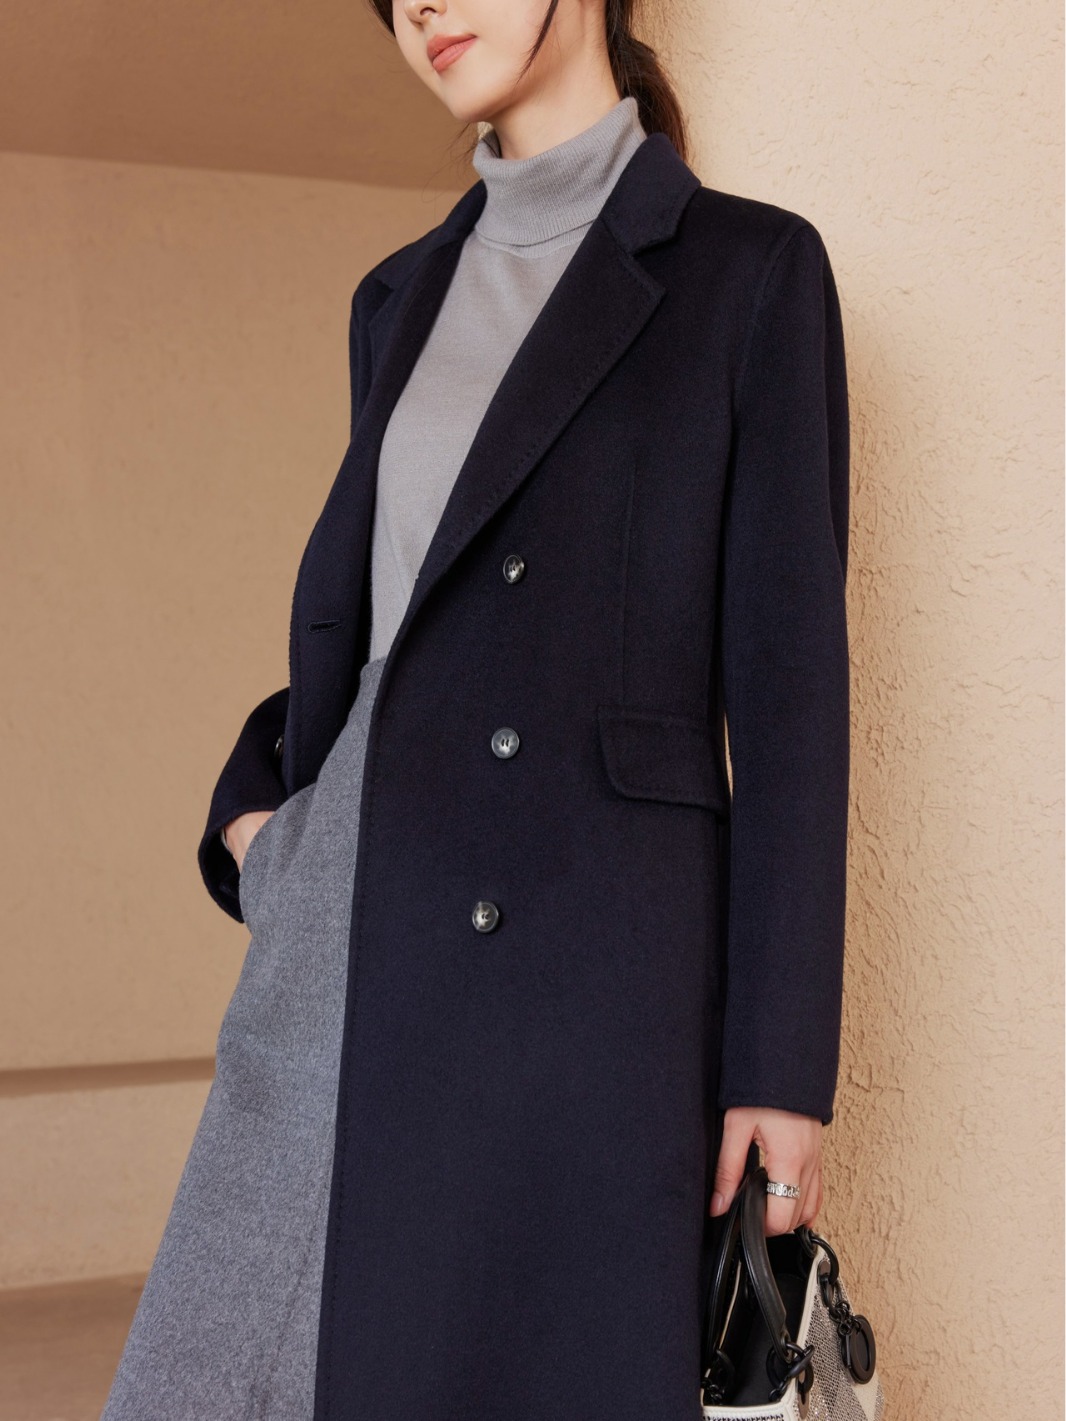 Delicate and Soft Reversible Cashmere Coat Women's Long Lapel Double Breasted Slim High-End Woolen Coat High-End Sense